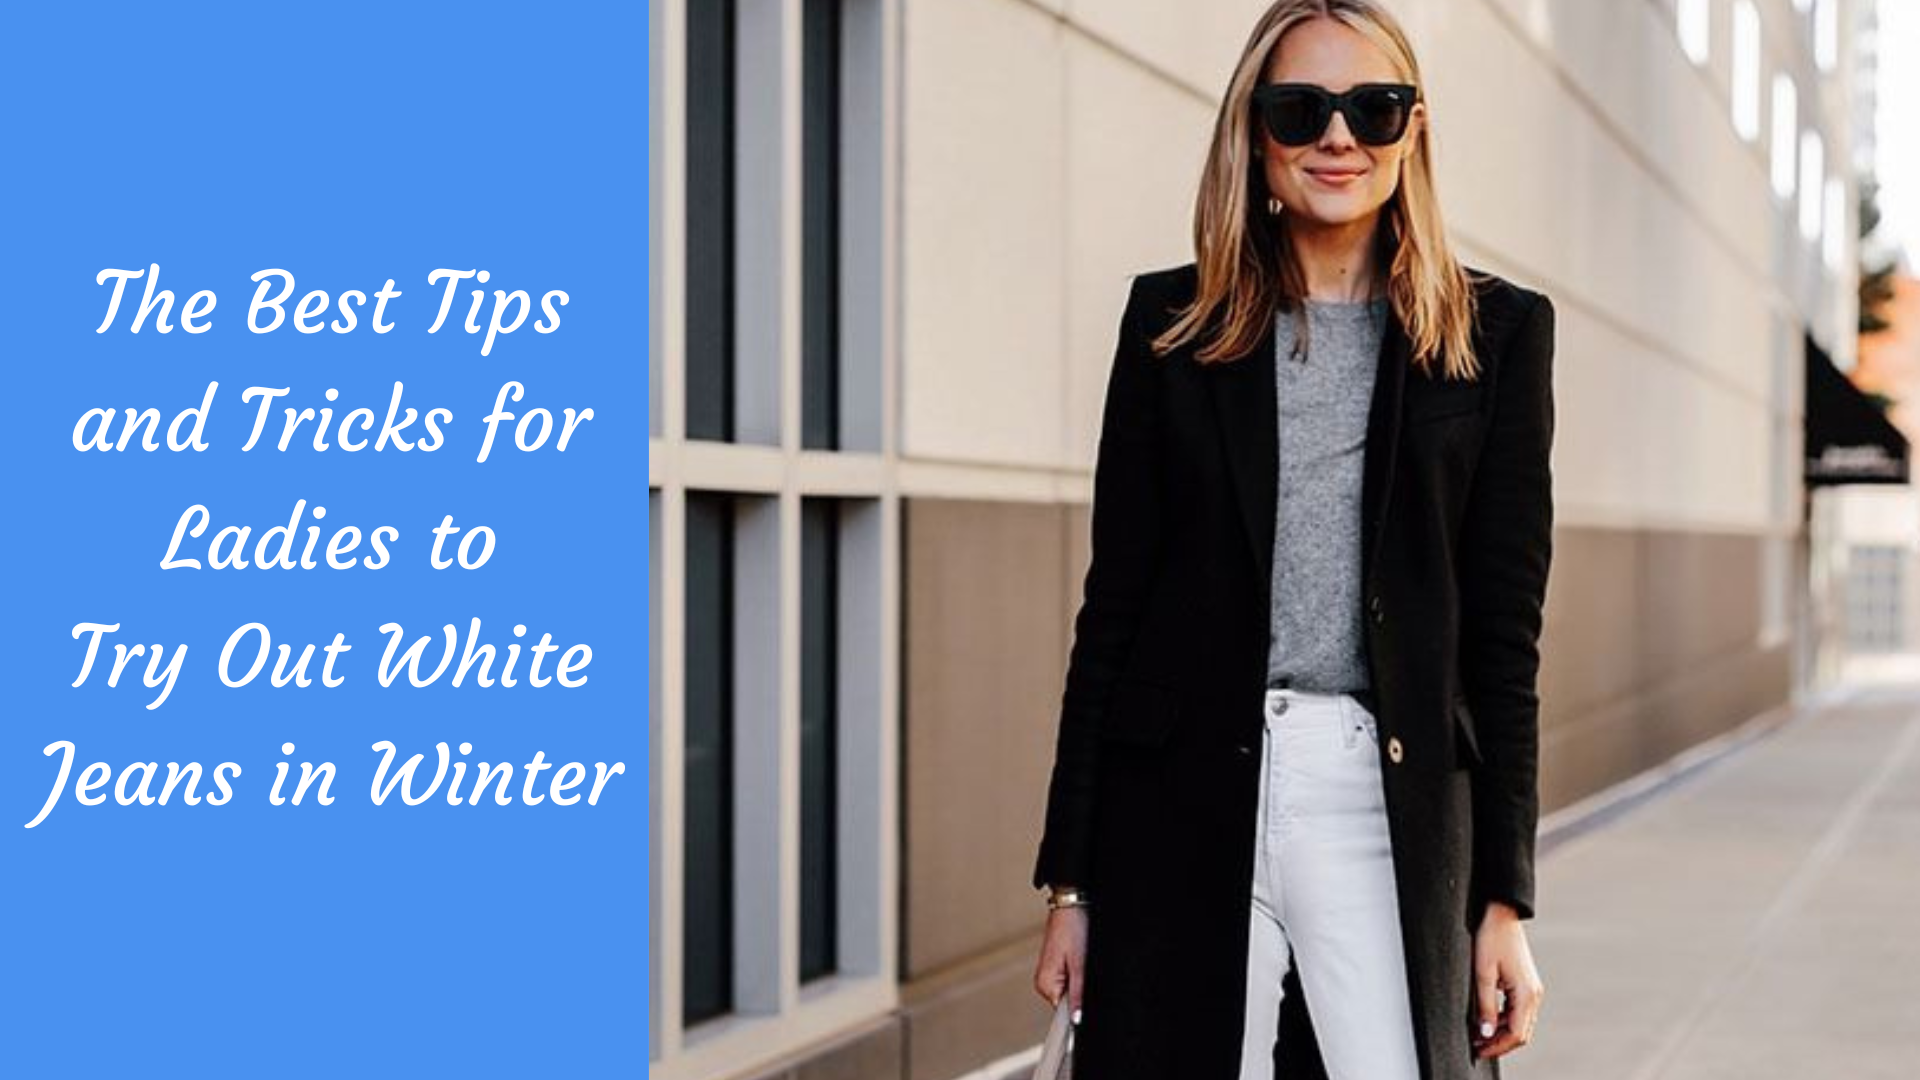 white jeans in winter article cover image